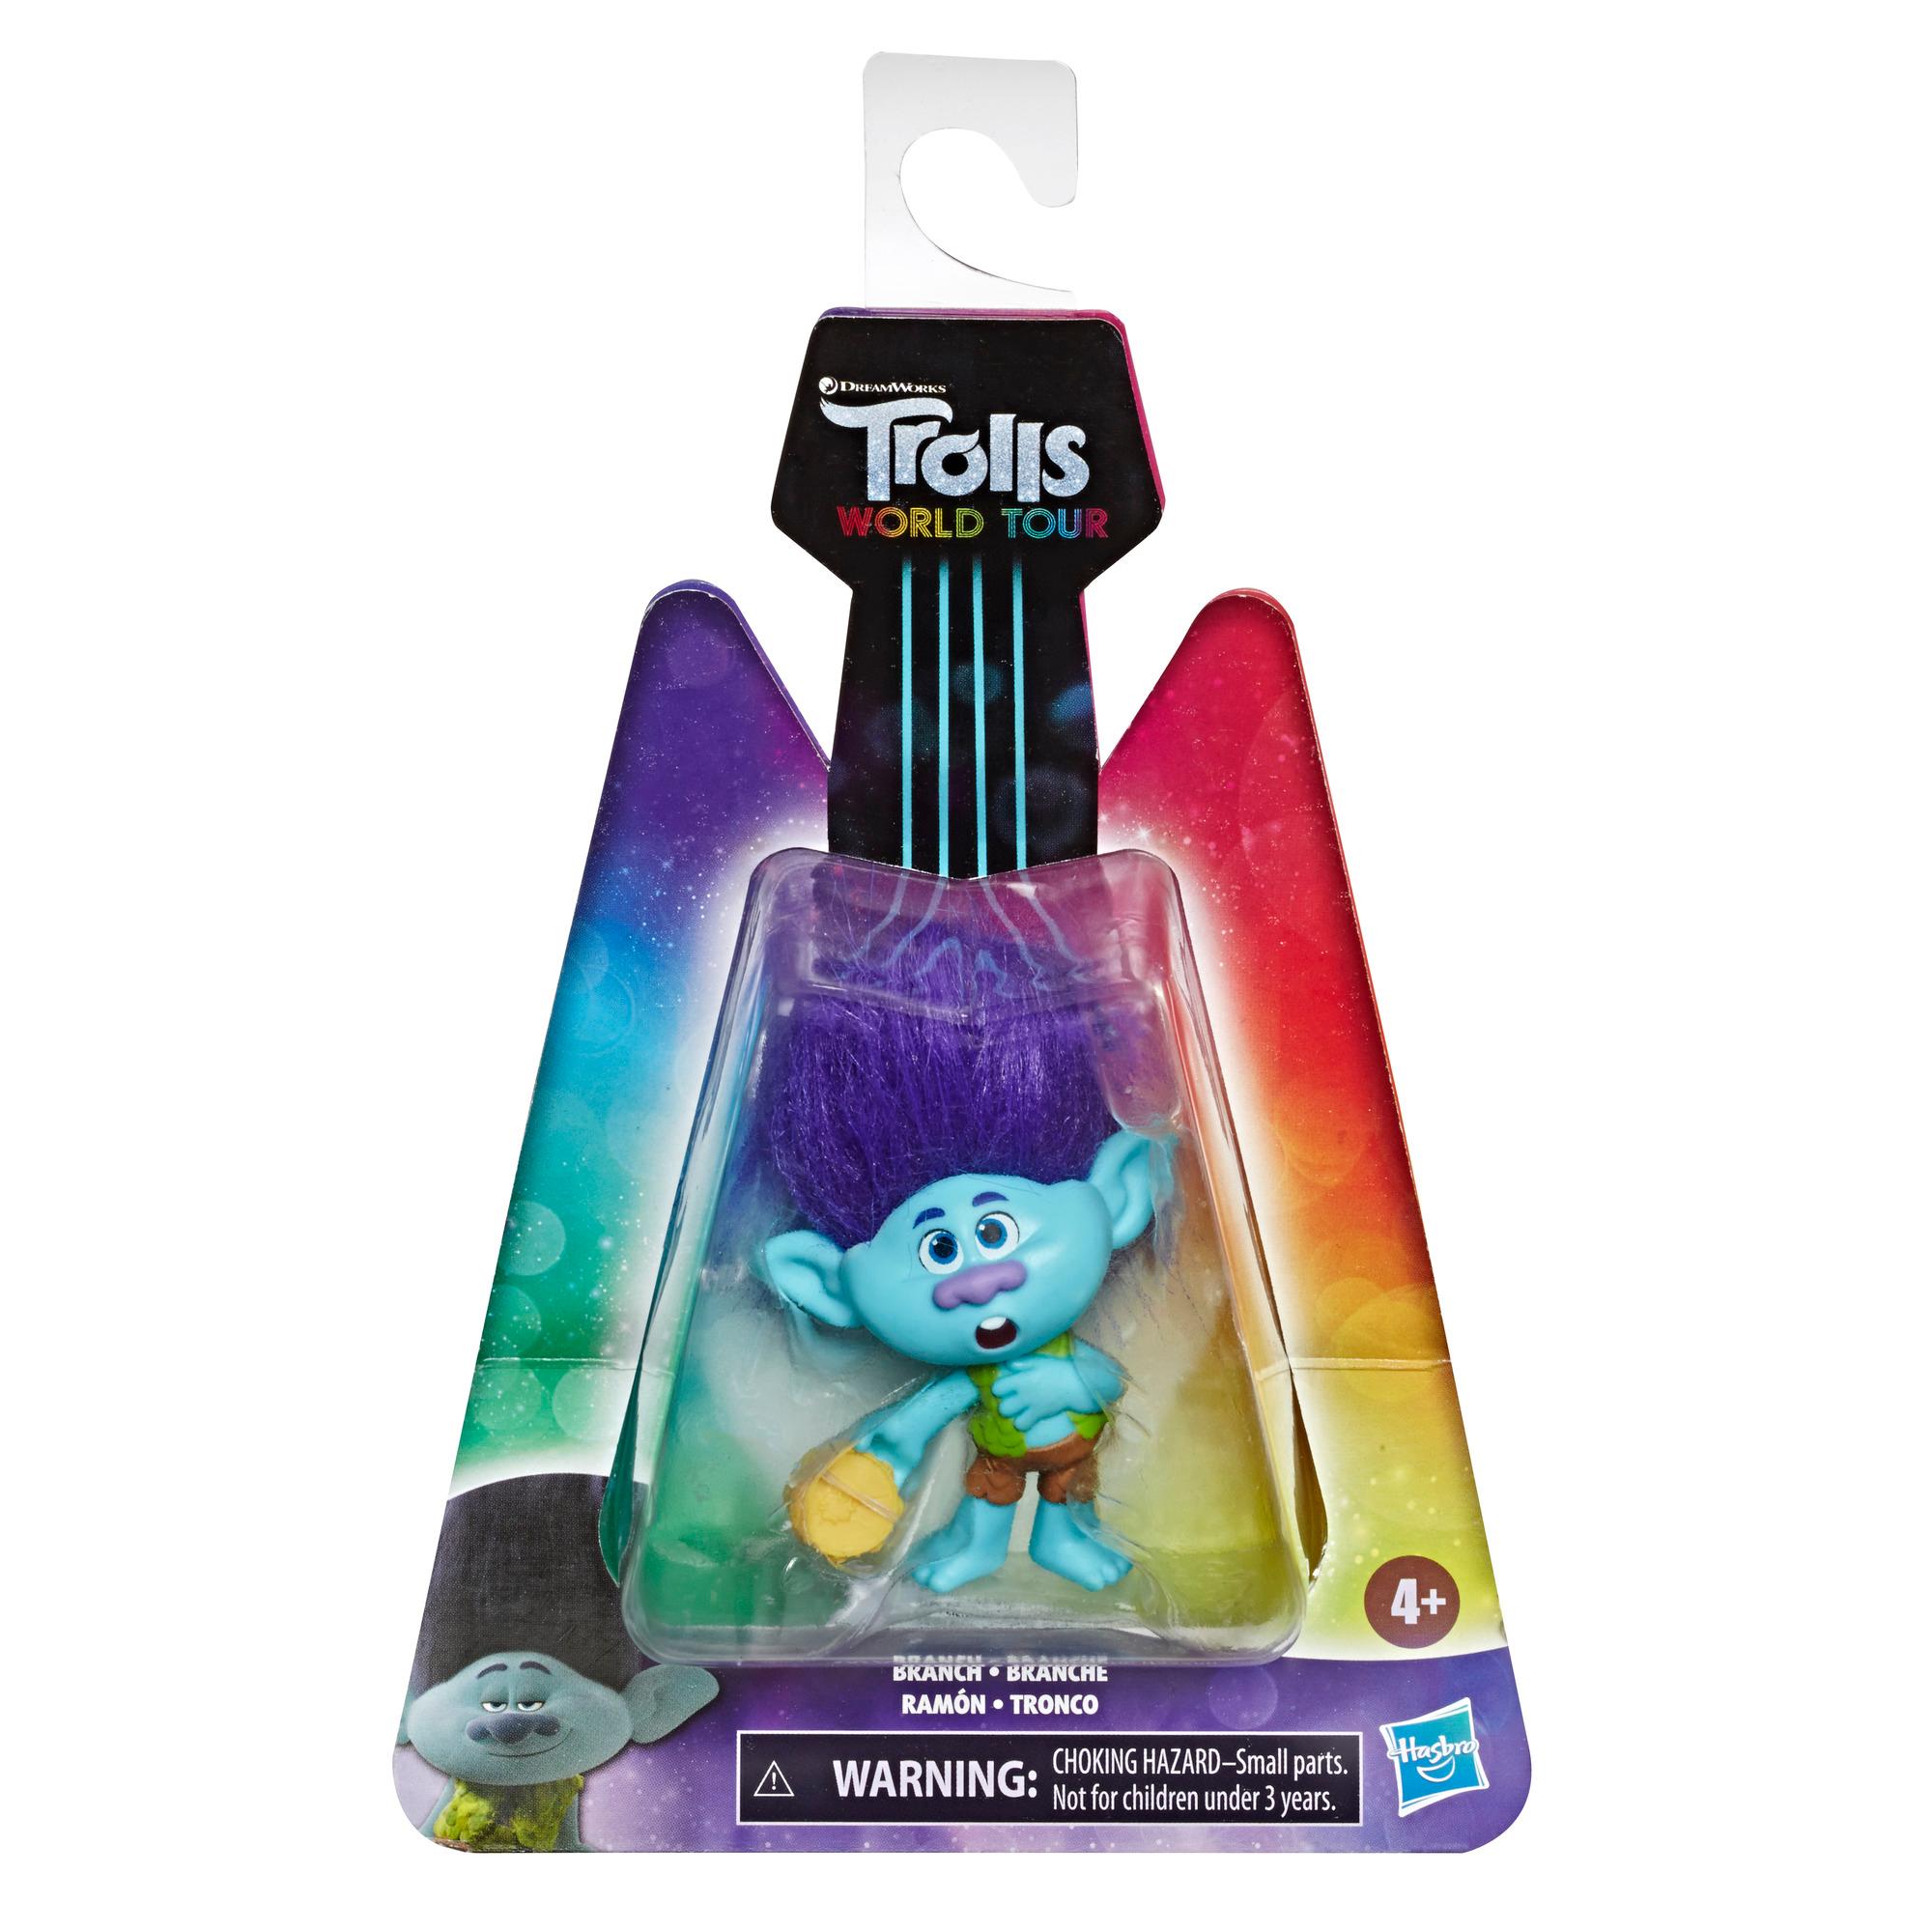 DreamWorks Trolls World Tour Branch, Doll Figure with Tambourine Accessory, Toy Inspired by the Movie Trolls World Tour